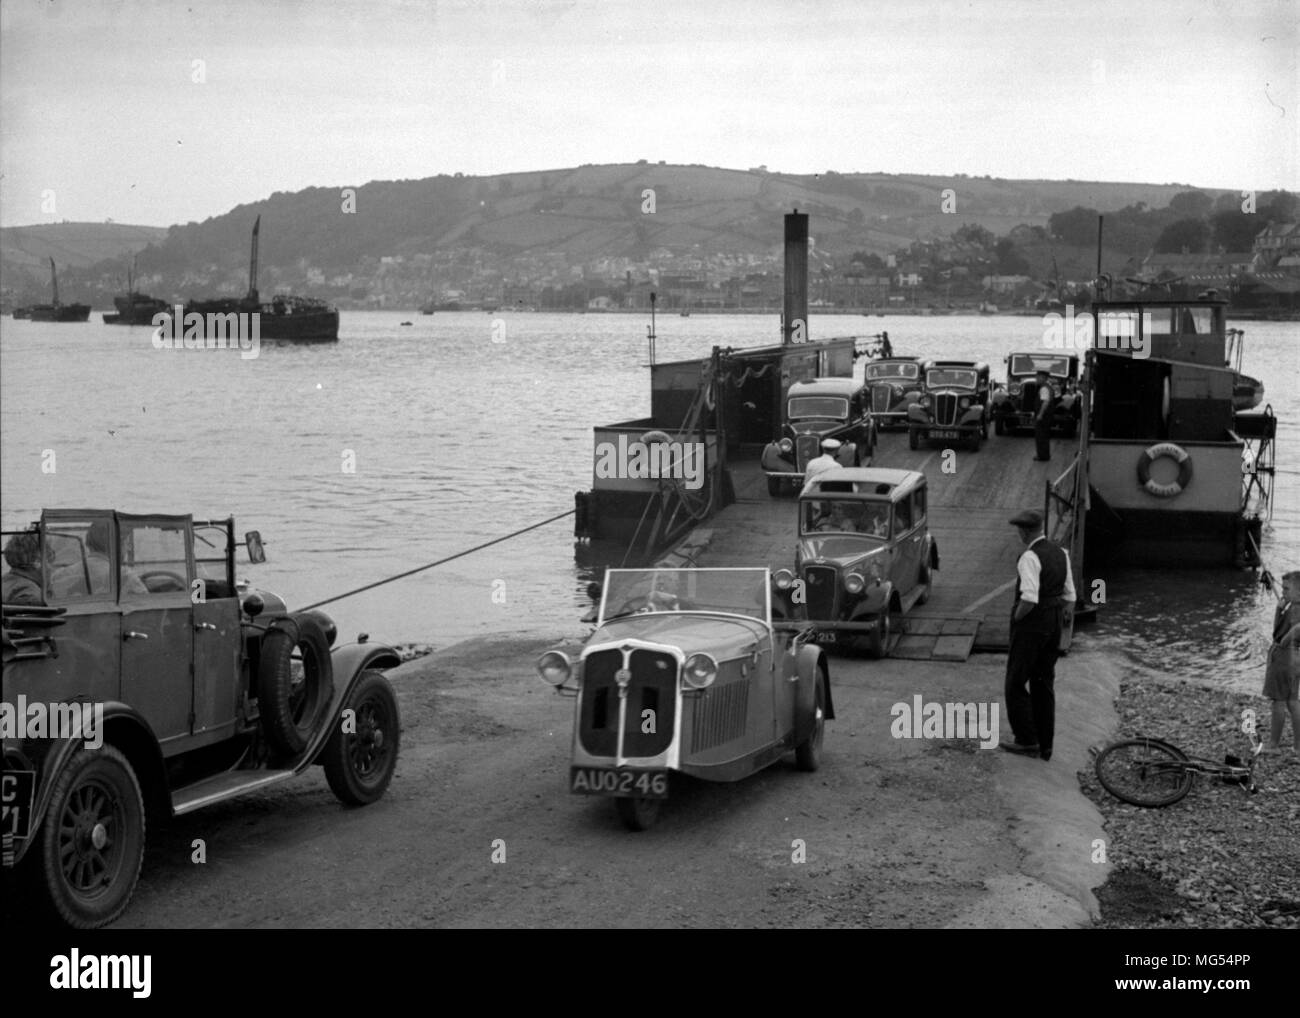 A Raleigh Safety t three wheeled car drives off a ferry in Devon in the 1930s, surrounded by vintage cars Stock Photo